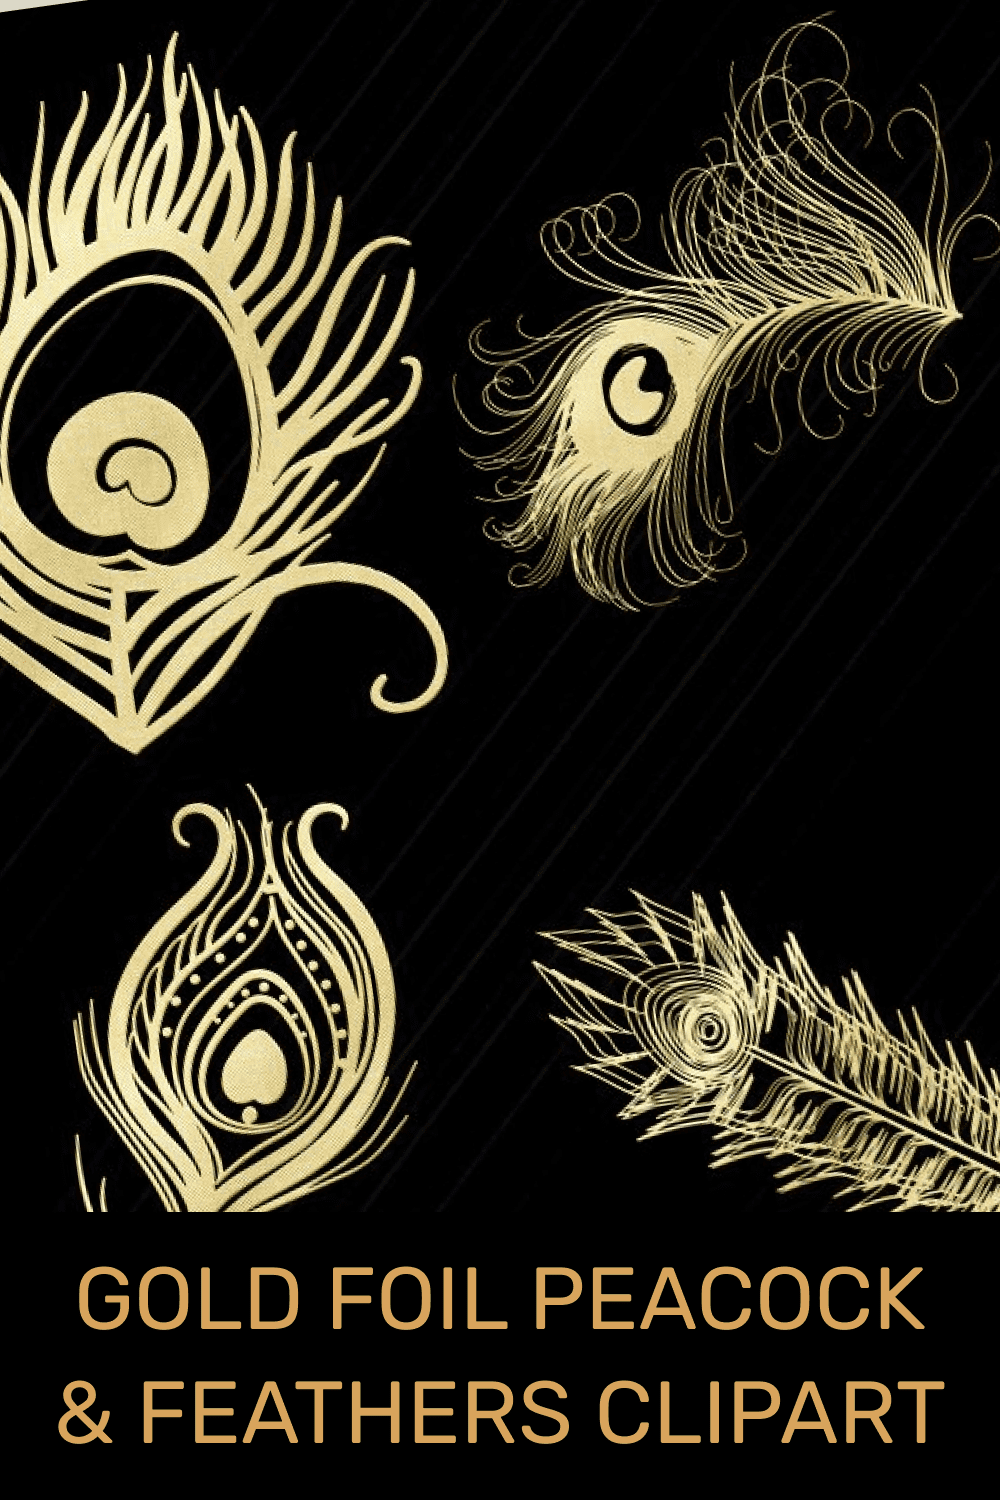 gold foil peacock feathers clipart pinterest image.